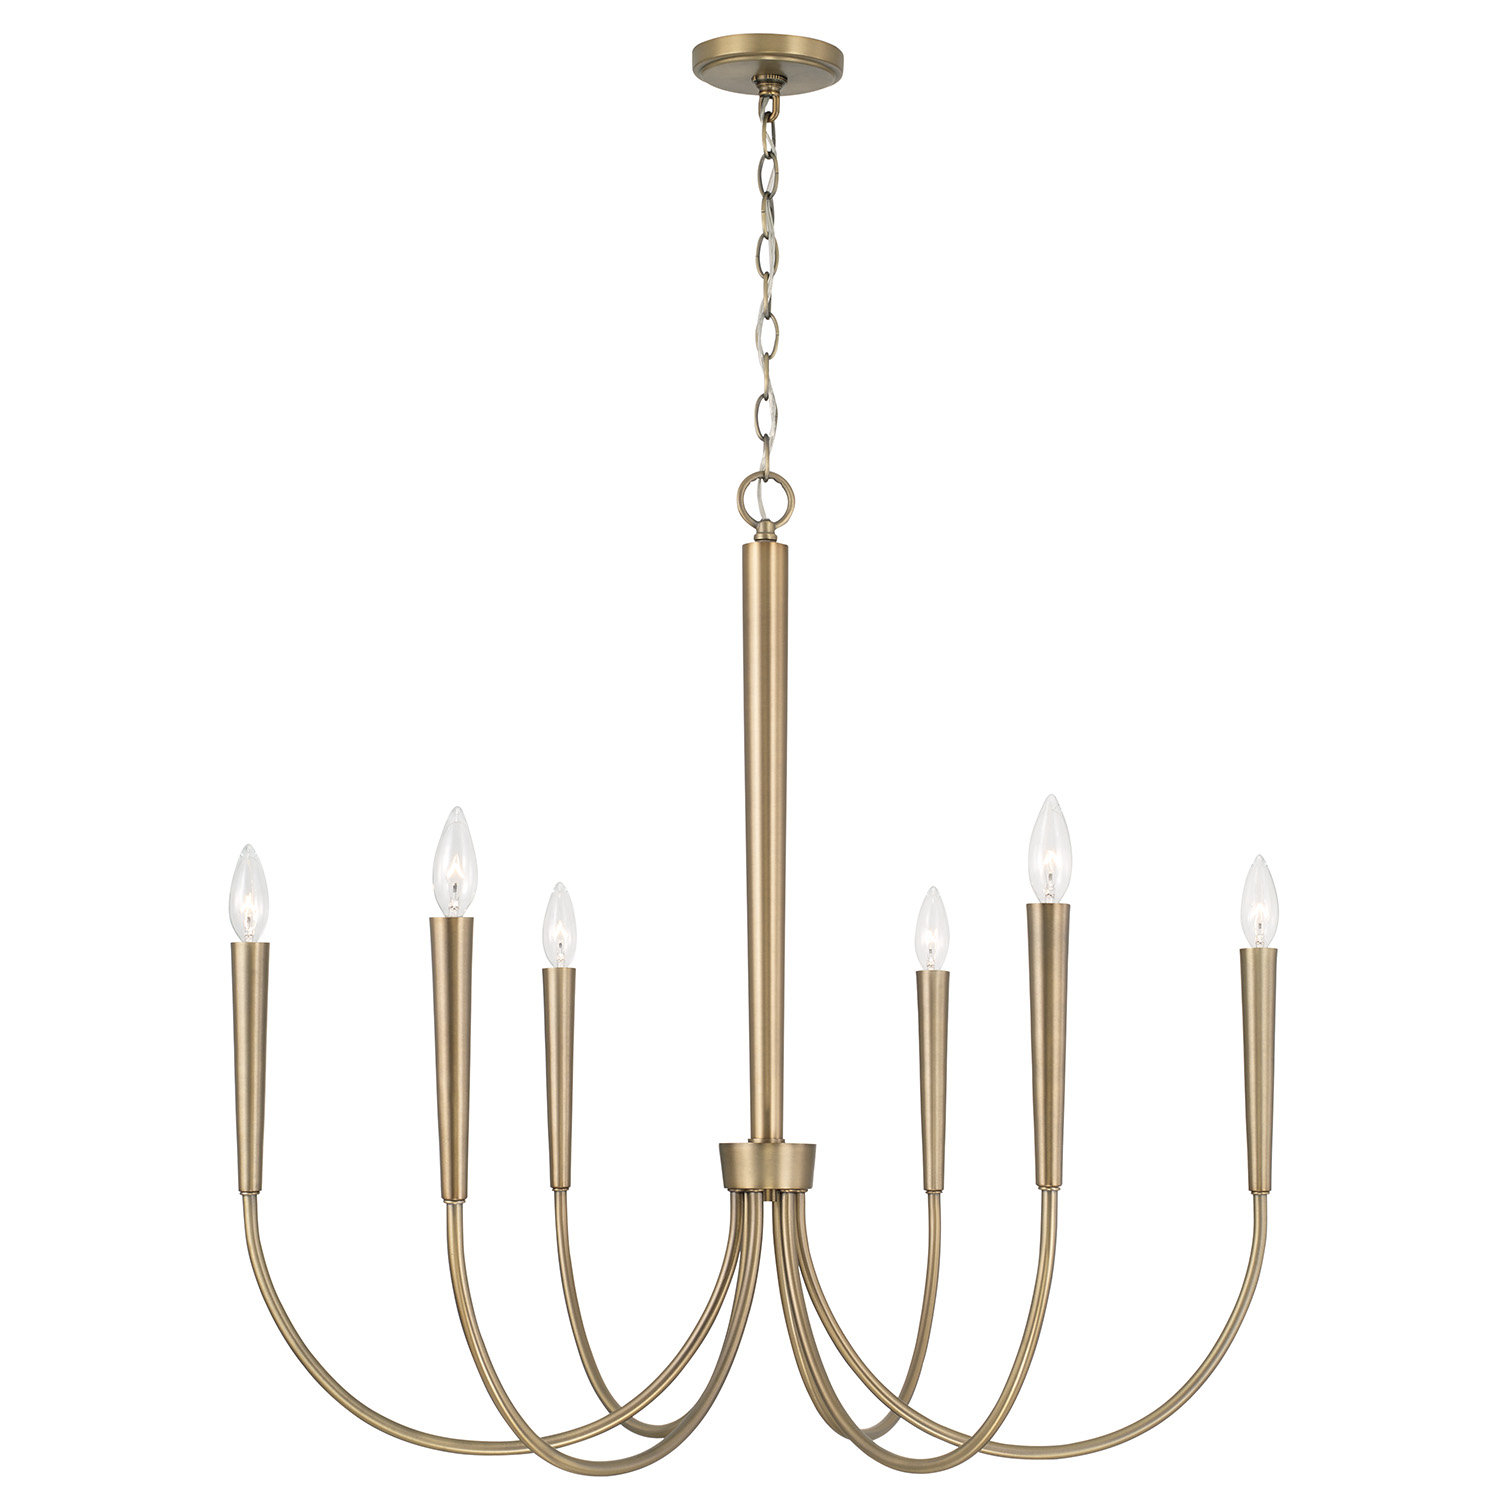 Cambridge Adjustable Wall Light in an Antique Brass Finish with